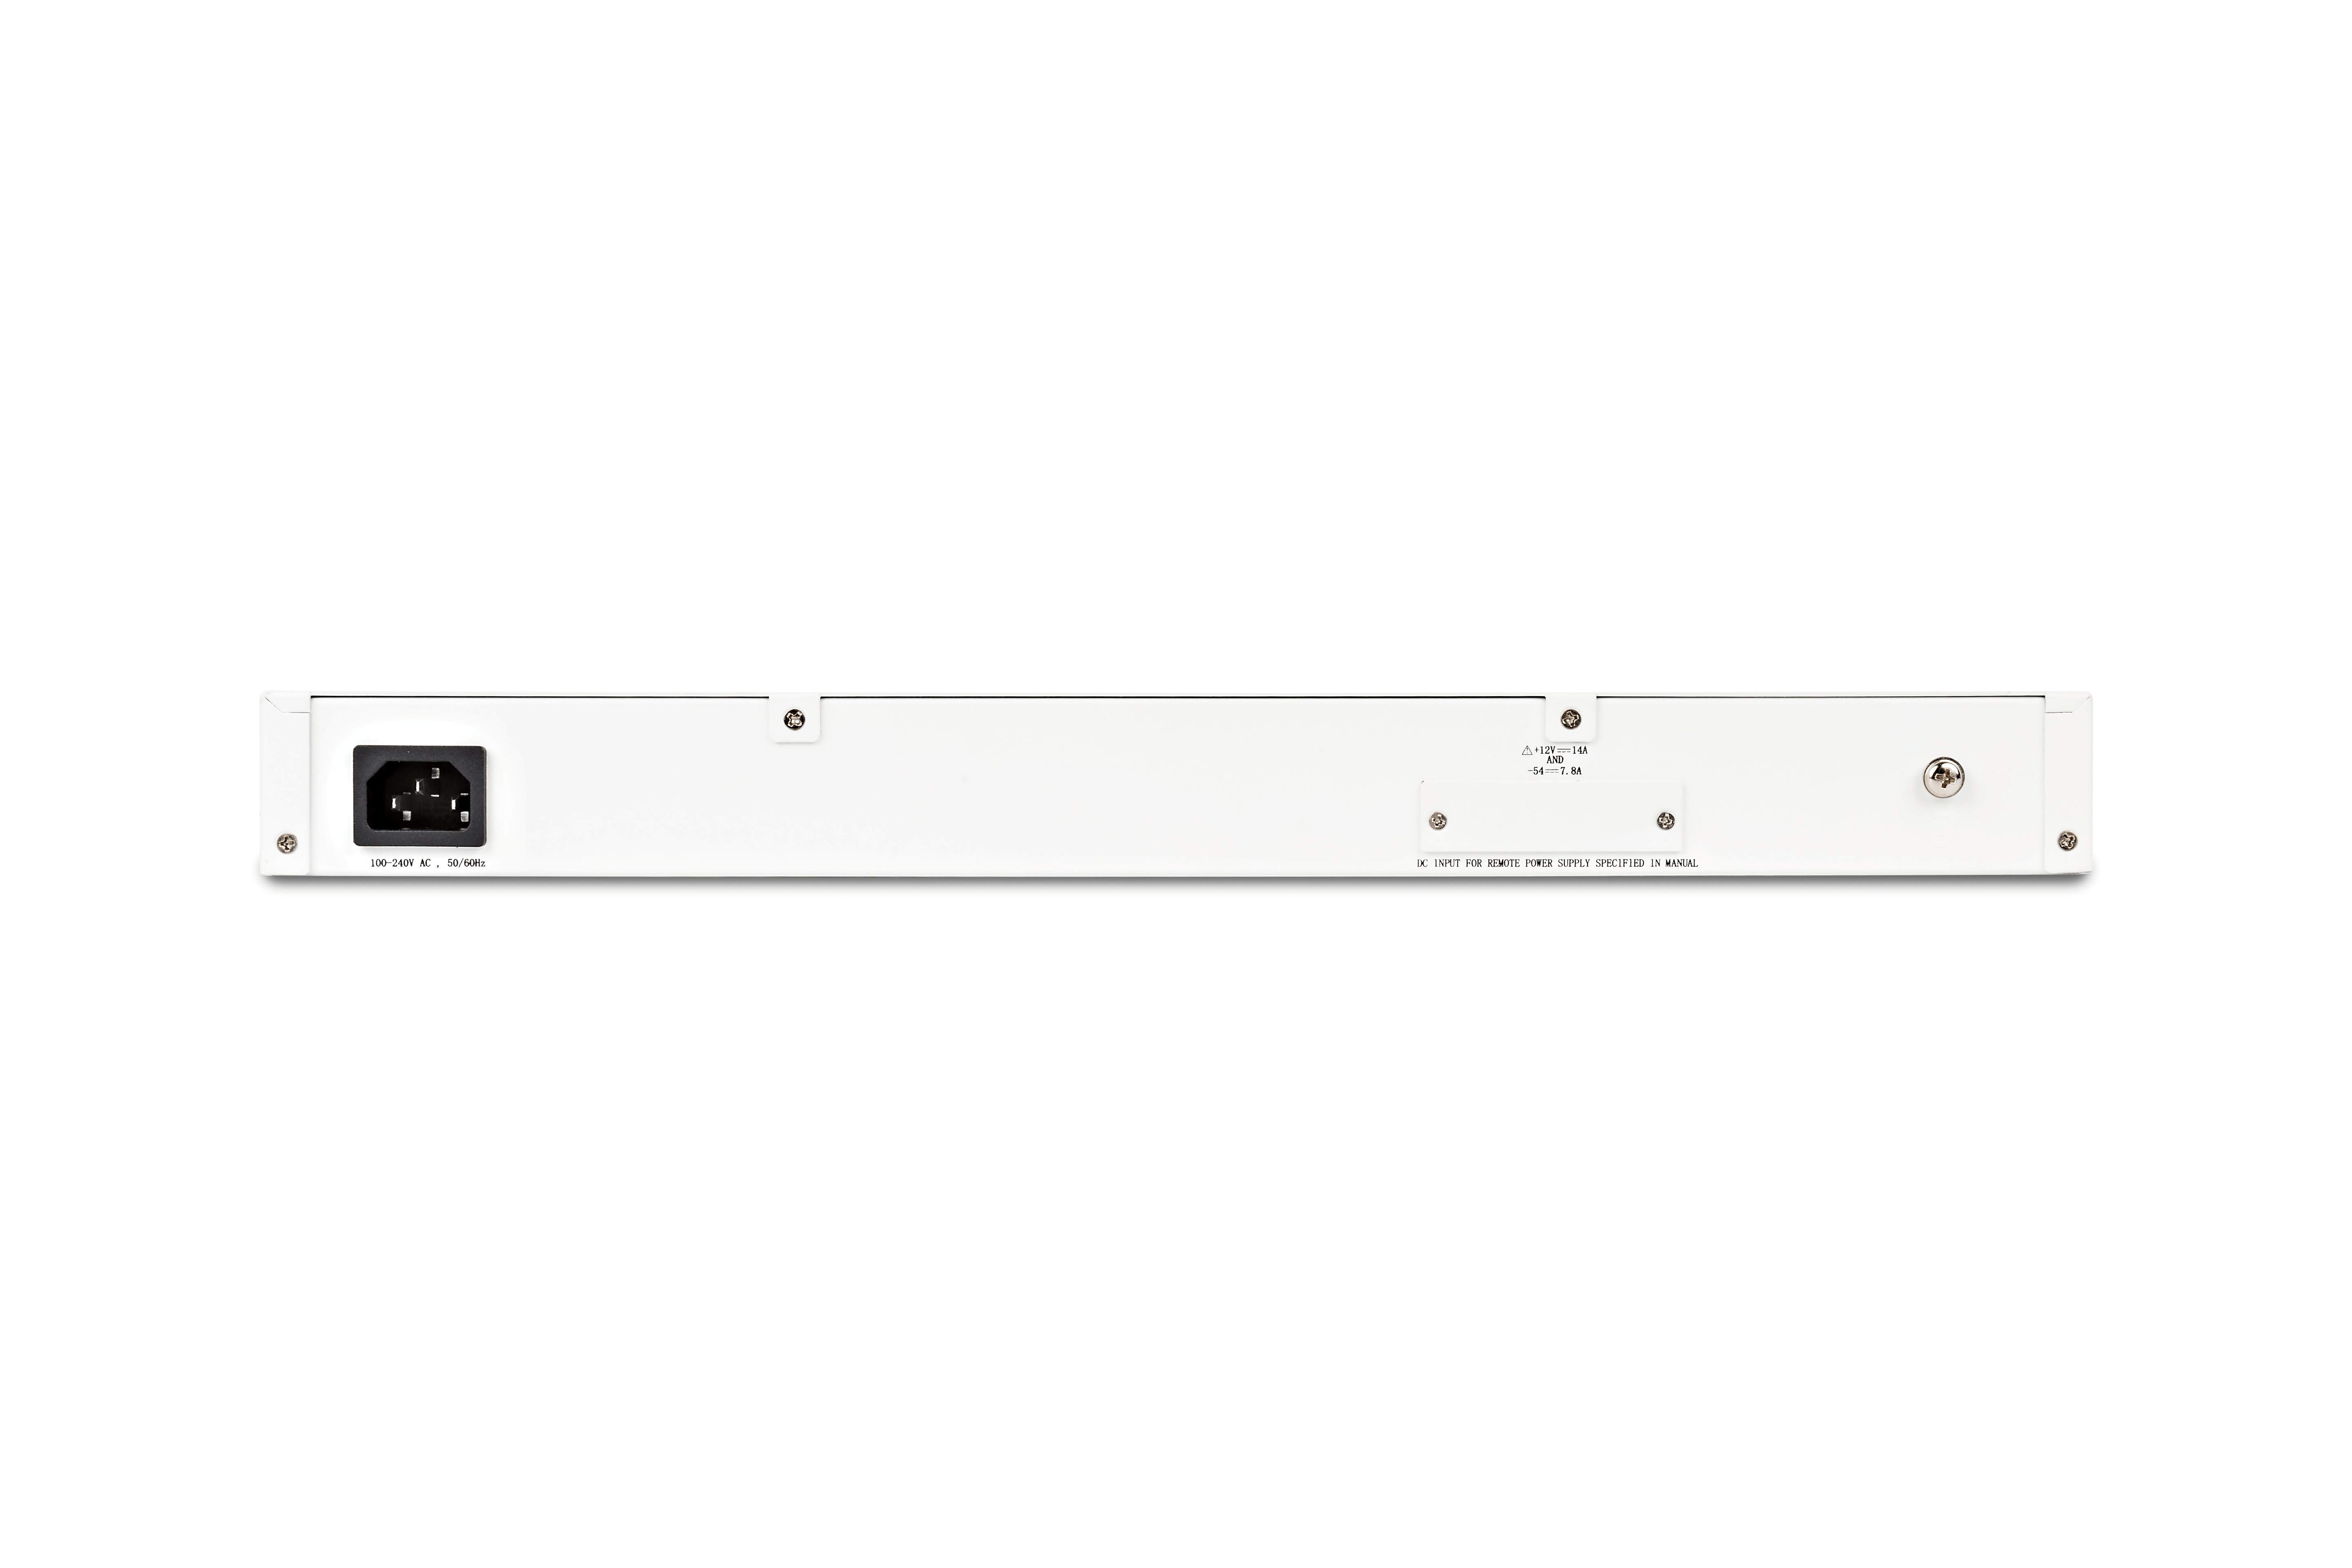 Fortinet FortiSwitch-124E-POE